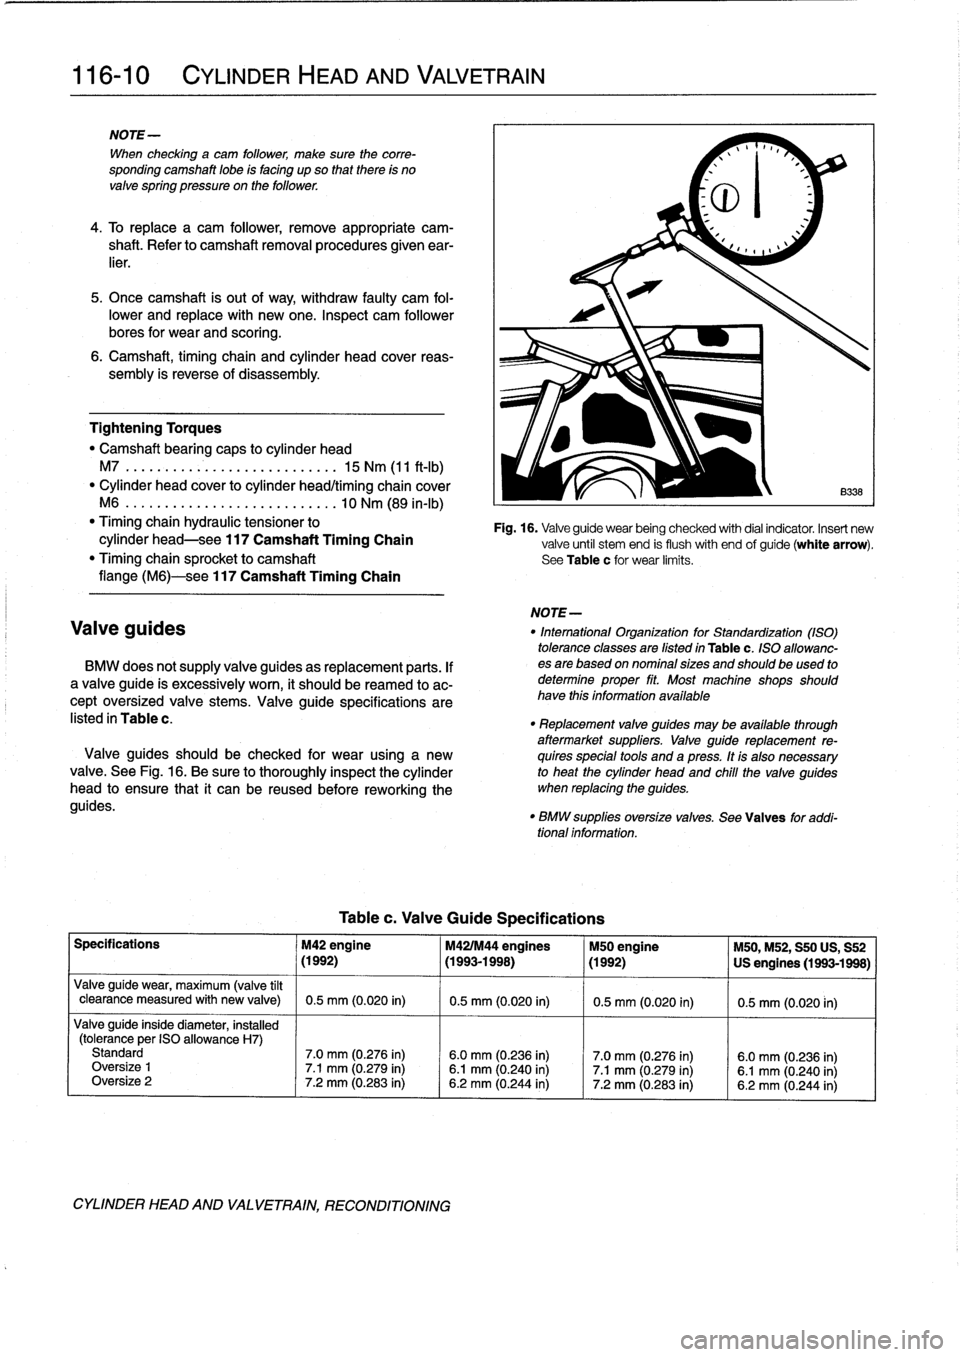 BMW 318i 1996 E36 Workshop Manual 
116-
1
0

	

CYLINDER
HEADAND
VALVETRAIN

NOTE-

When
checking
a
cam
follower,
make
sure
the
corre-
sponding
camshaft
lobe
ís
facing
up
so
that
there
is
no
valve
spring
pressure
on
the
follower
.

4